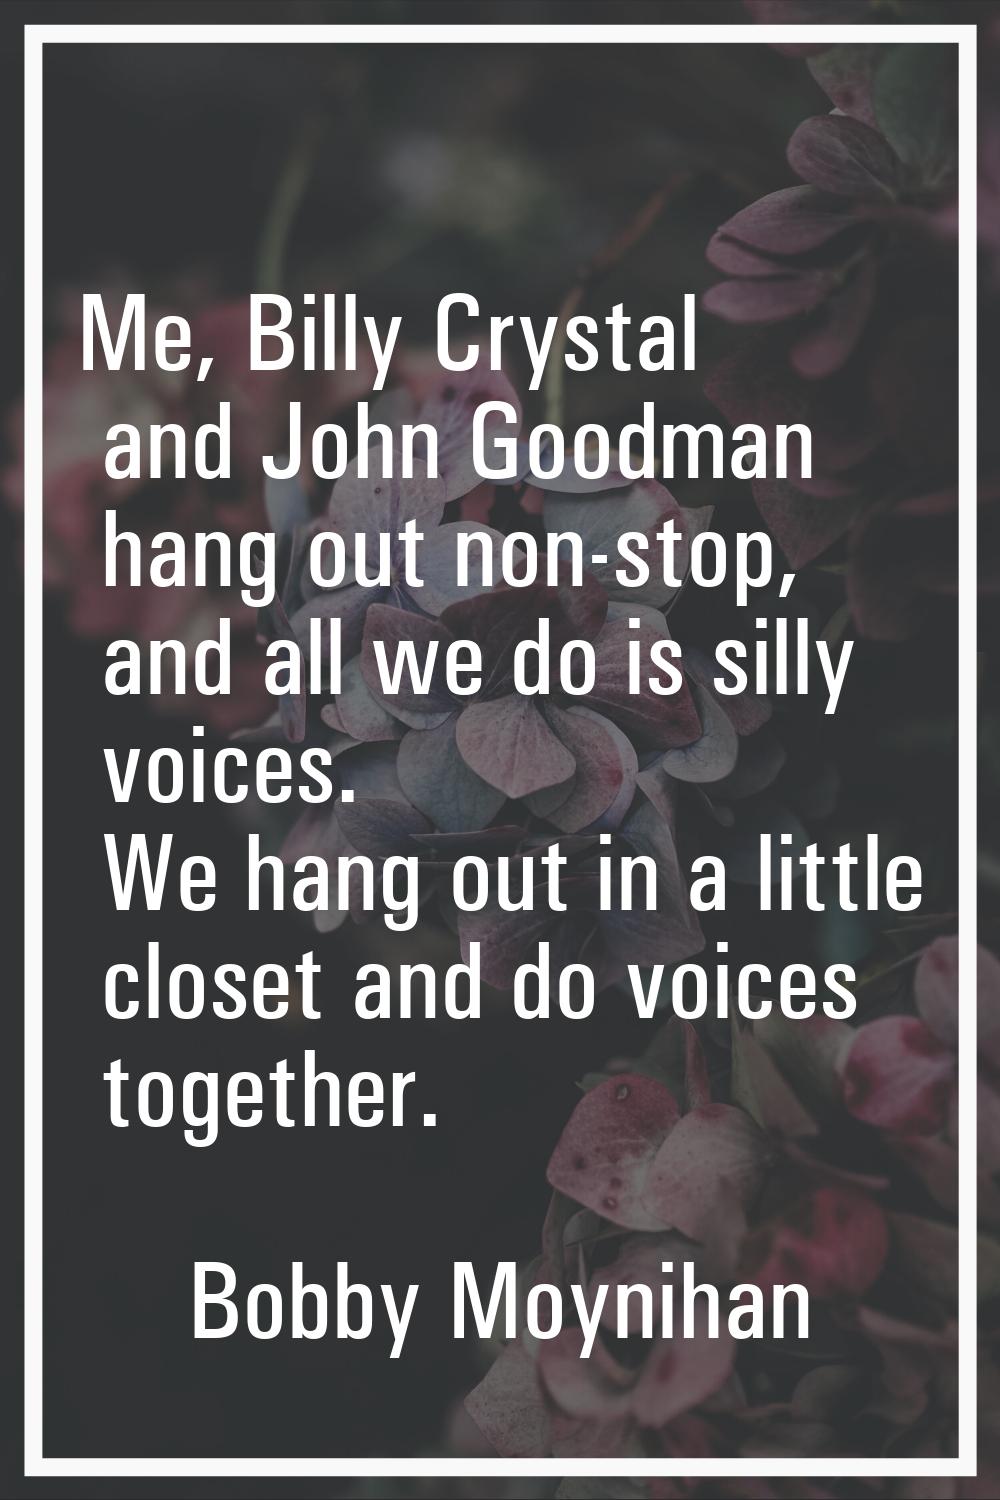 Me, Billy Crystal and John Goodman hang out non-stop, and all we do is silly voices. We hang out in